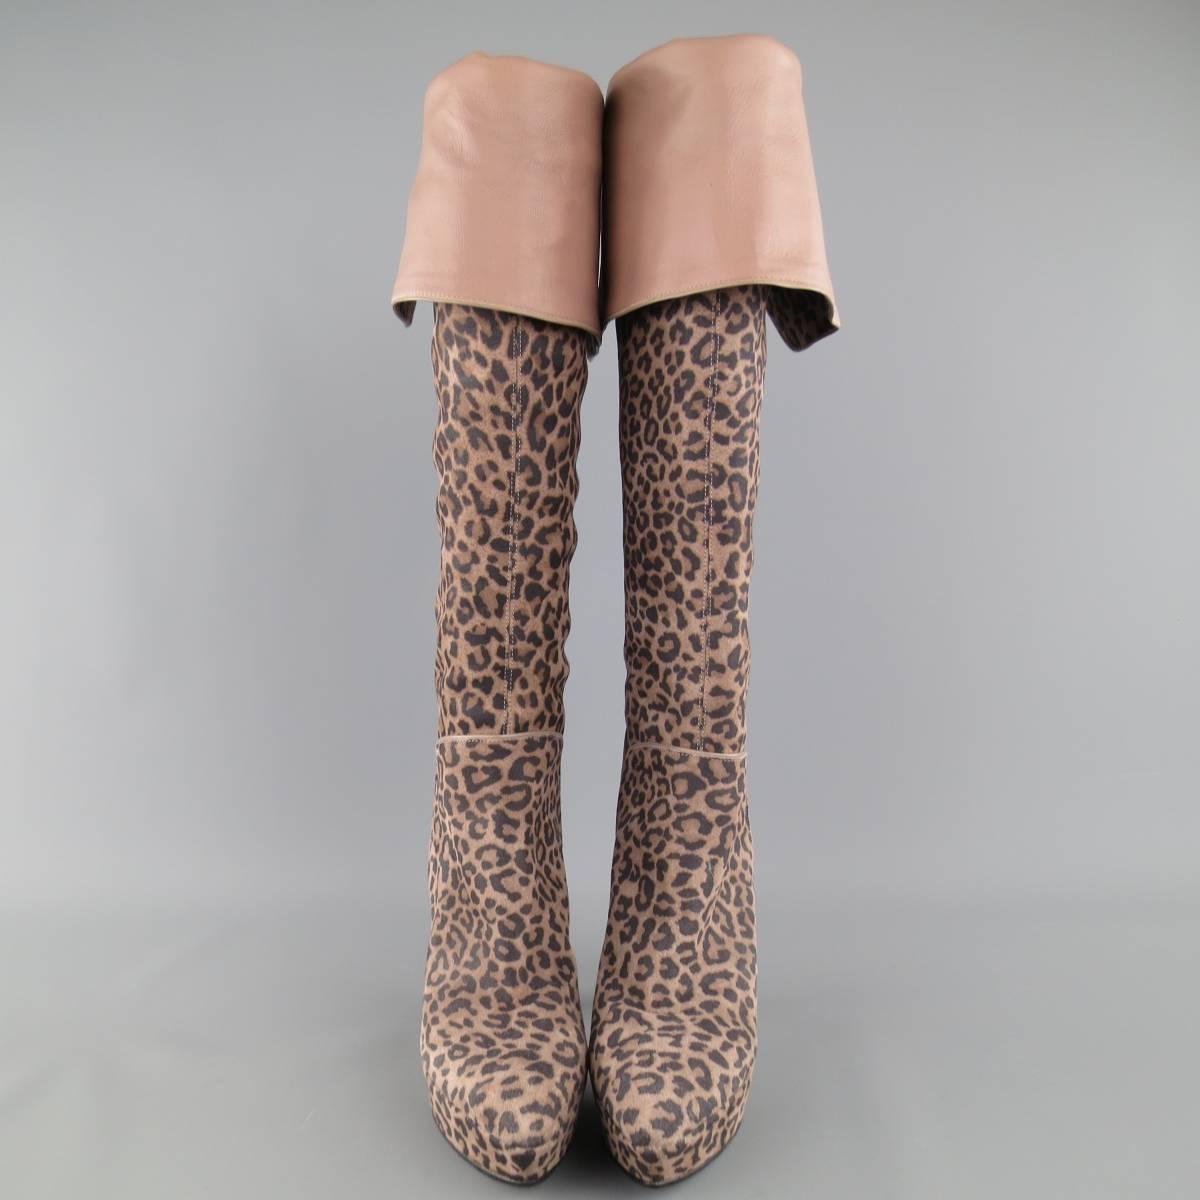 SERGIO ROSSI over-the-knee boots come in a taupe cheetah leopard print suede and feature a pointed toe with covered platform, taupe leather lining, and covered stiletto heel. Made in Italy.
 
Excellent Pre-Owned Condition.
Marked: IT 36
